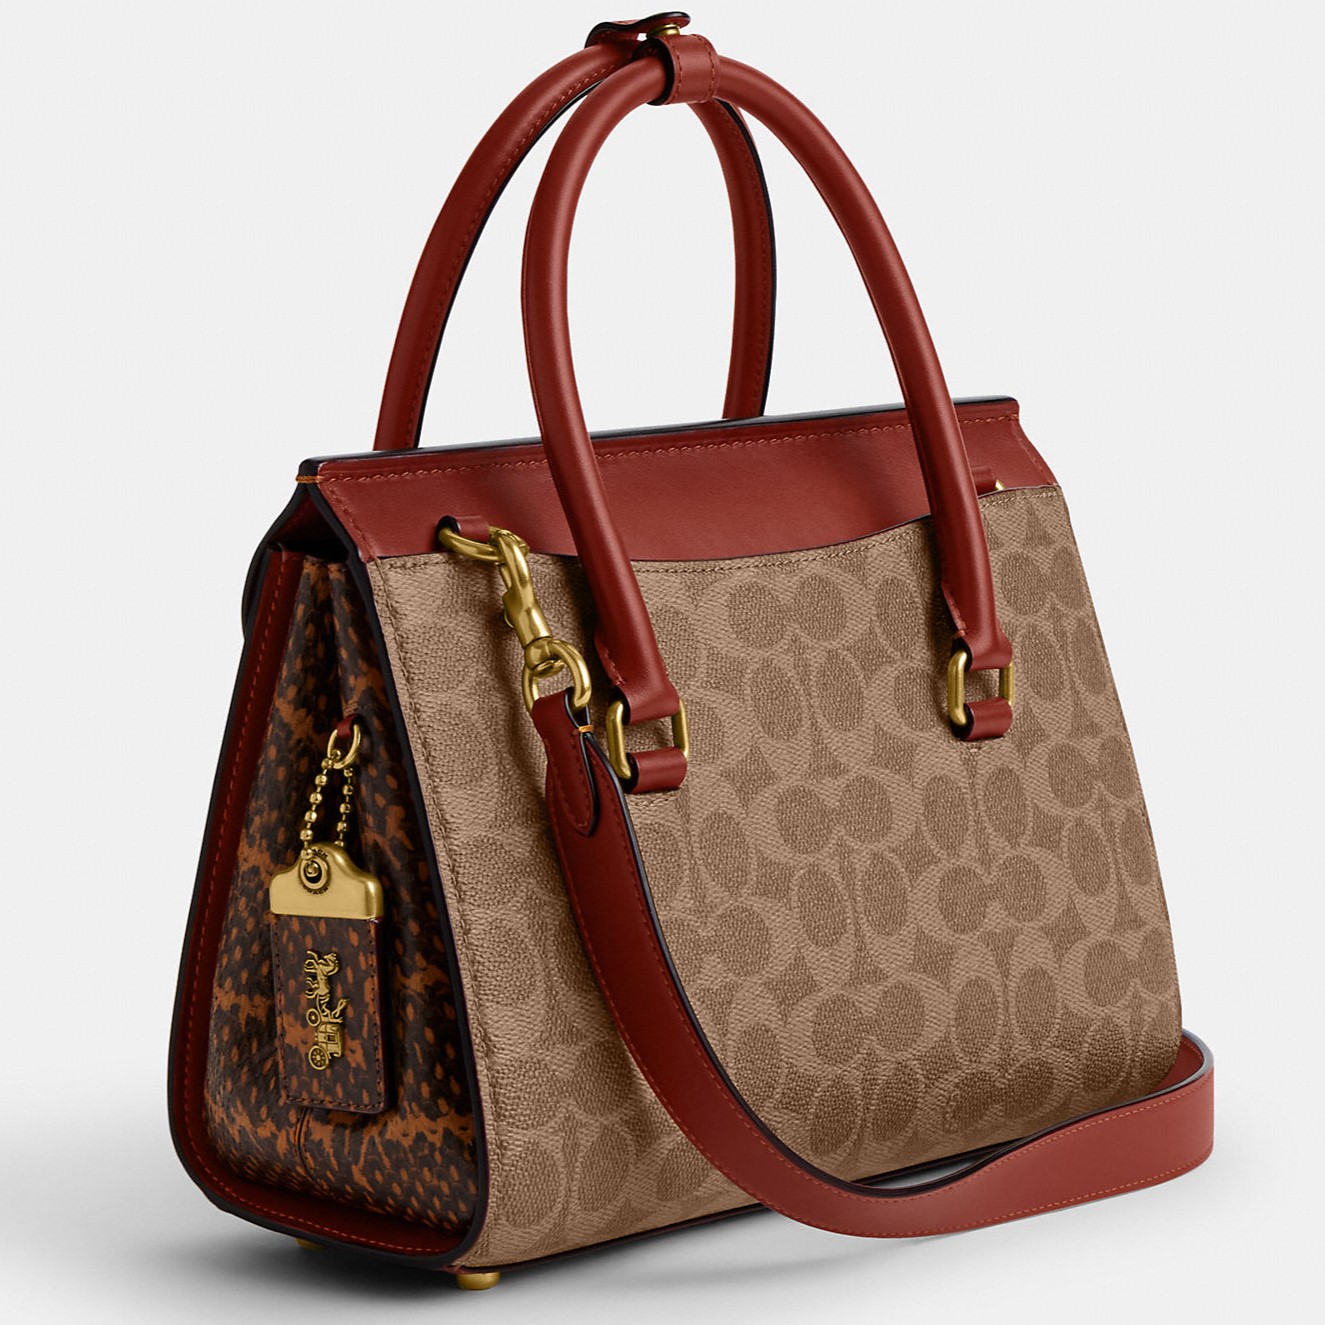 TÚI COACH NỮ BROOME CARRYALL IN SIGNATURE COATED CANVAS WITH SNAKESKIN DETAIL CP449 4